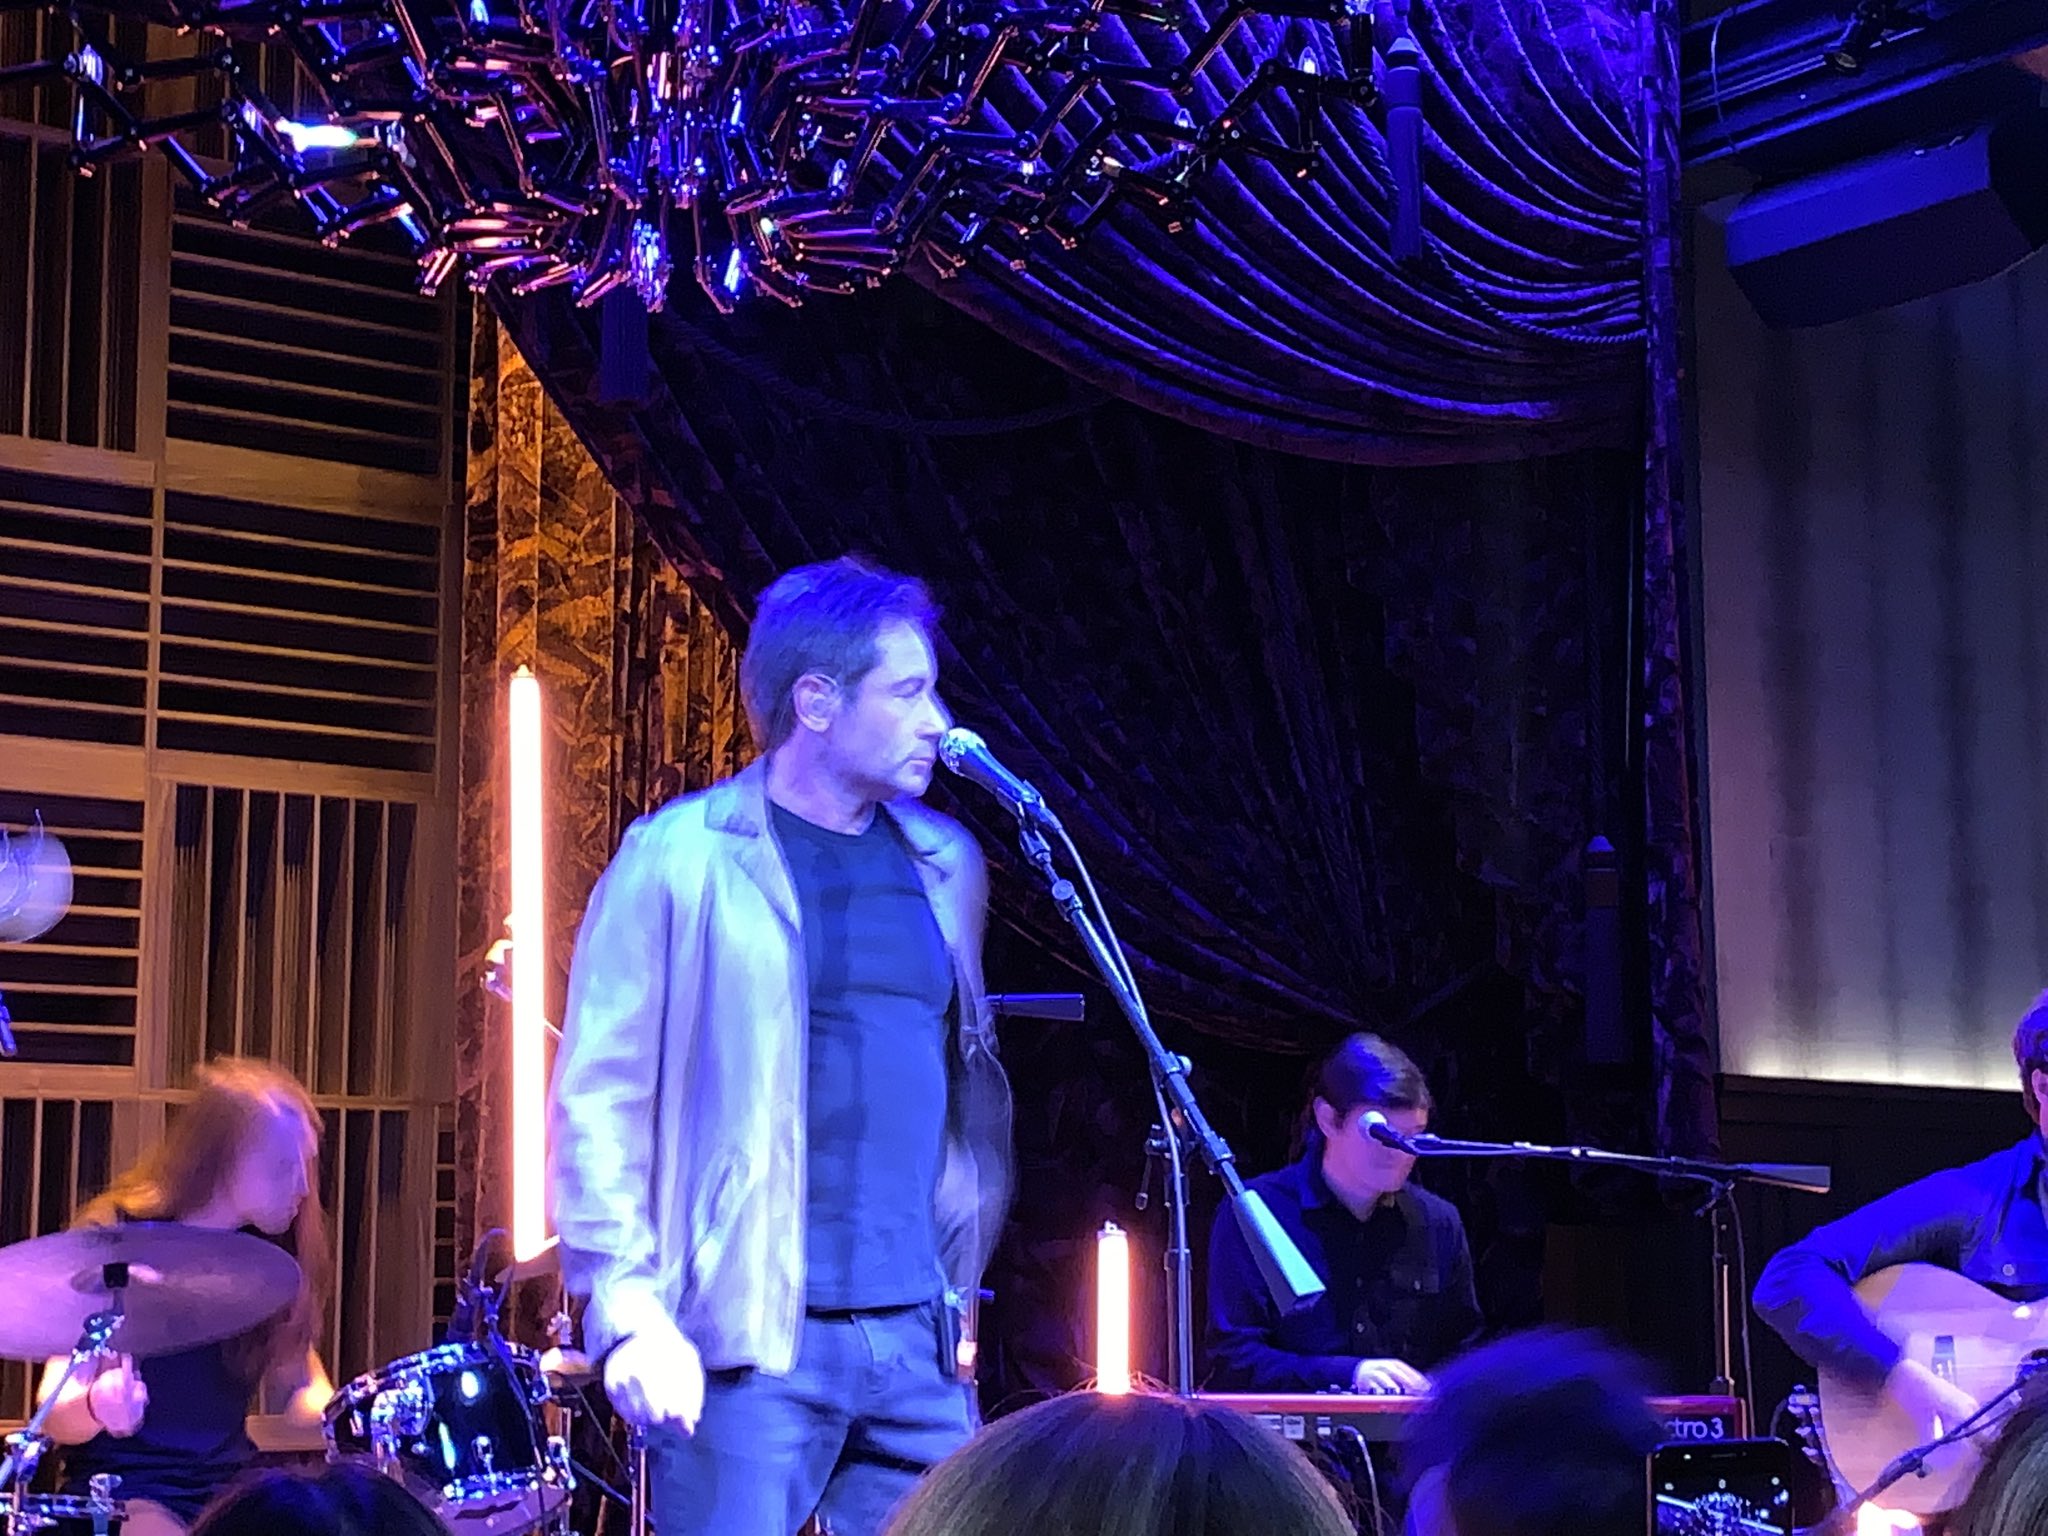 2018/12/09 - One Night with Davd Duchovny in Nashville DuAe14JX4AAGnYI